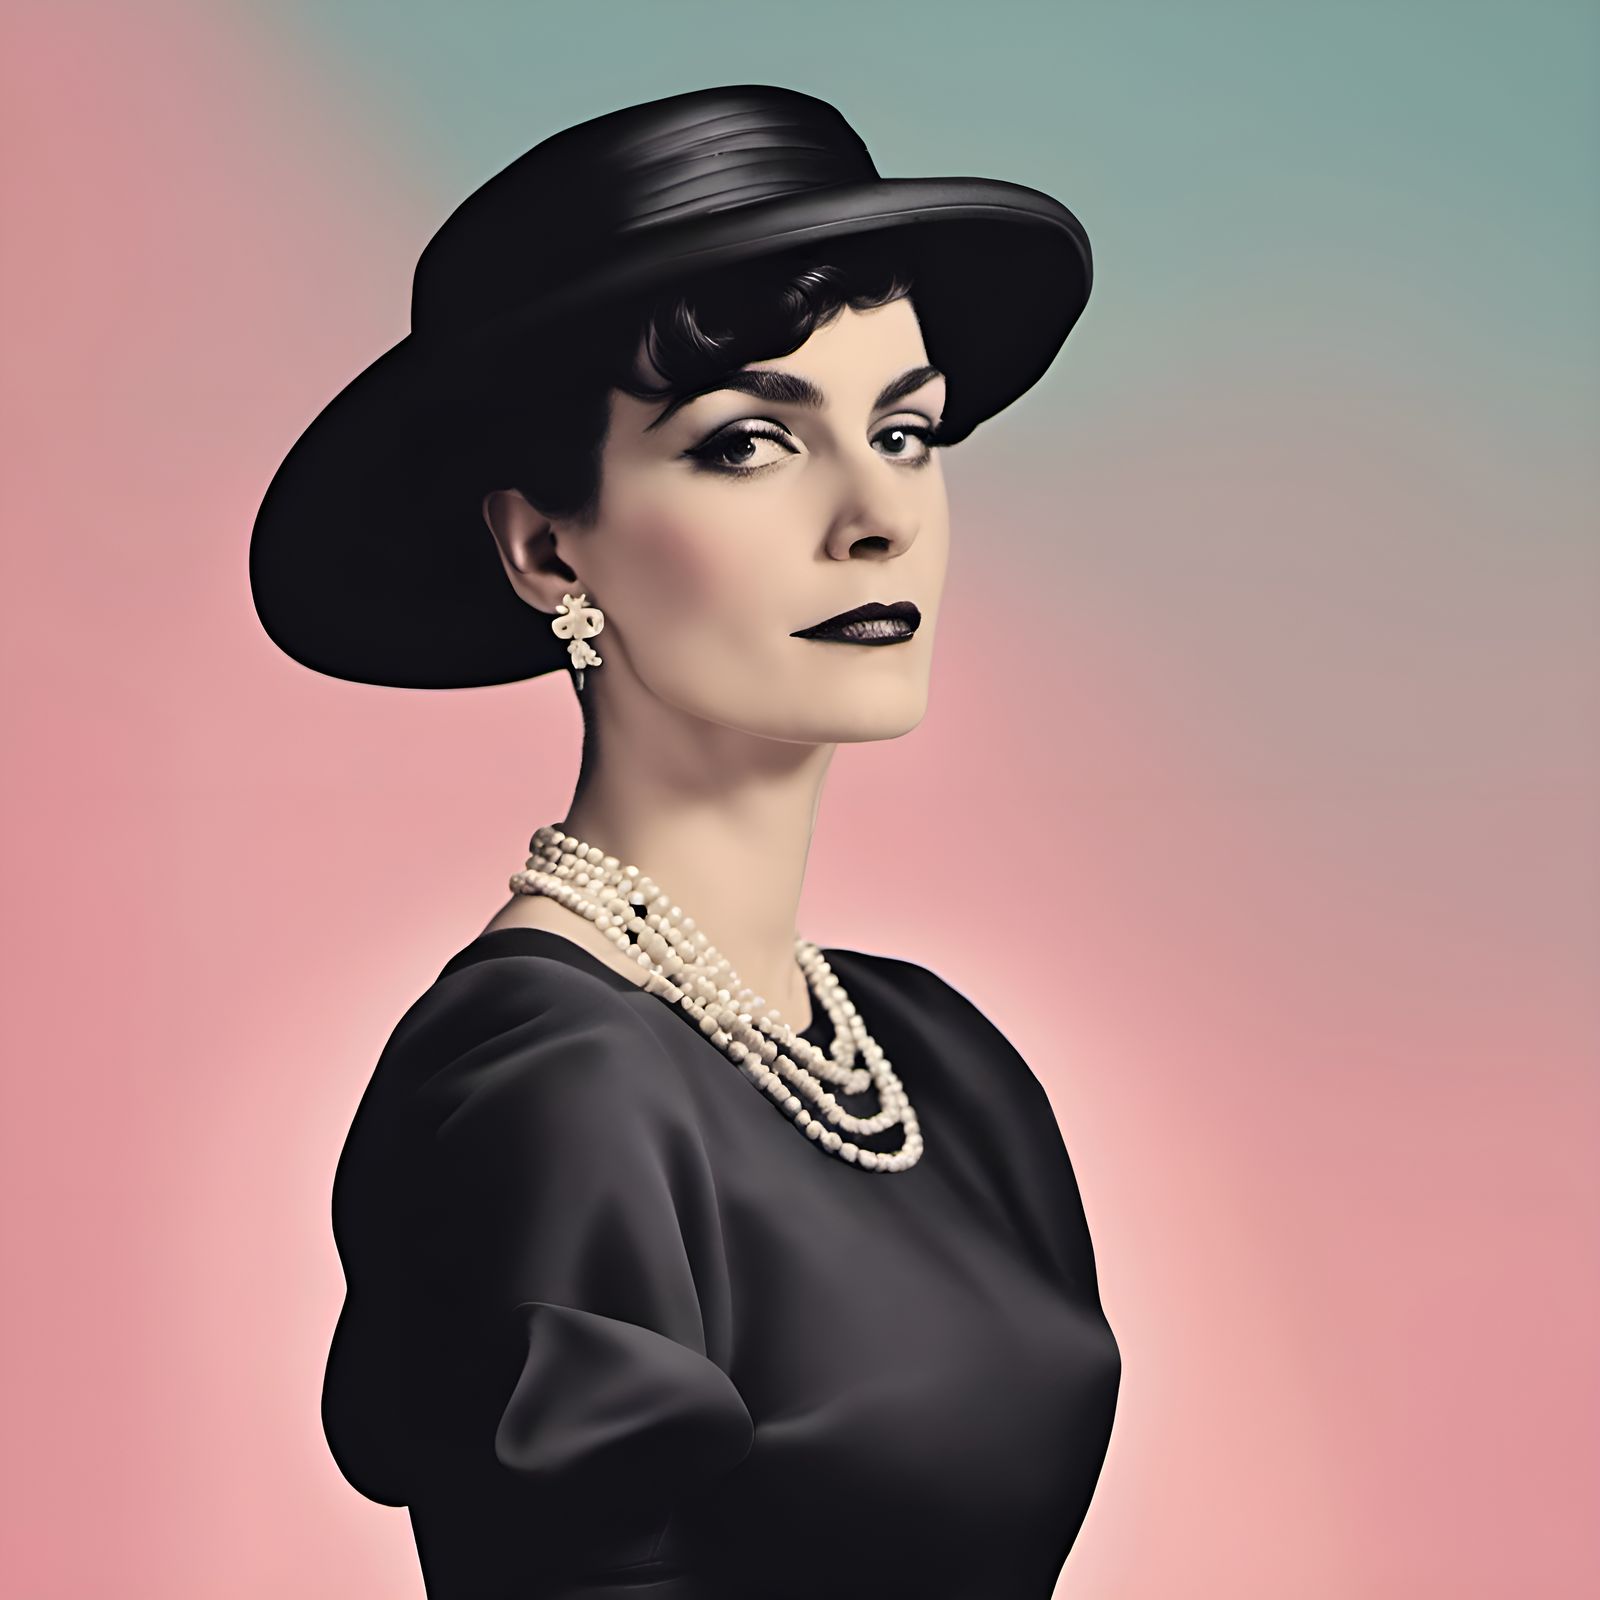 Who's a famous French designer? Her name is CoCo Chanel.